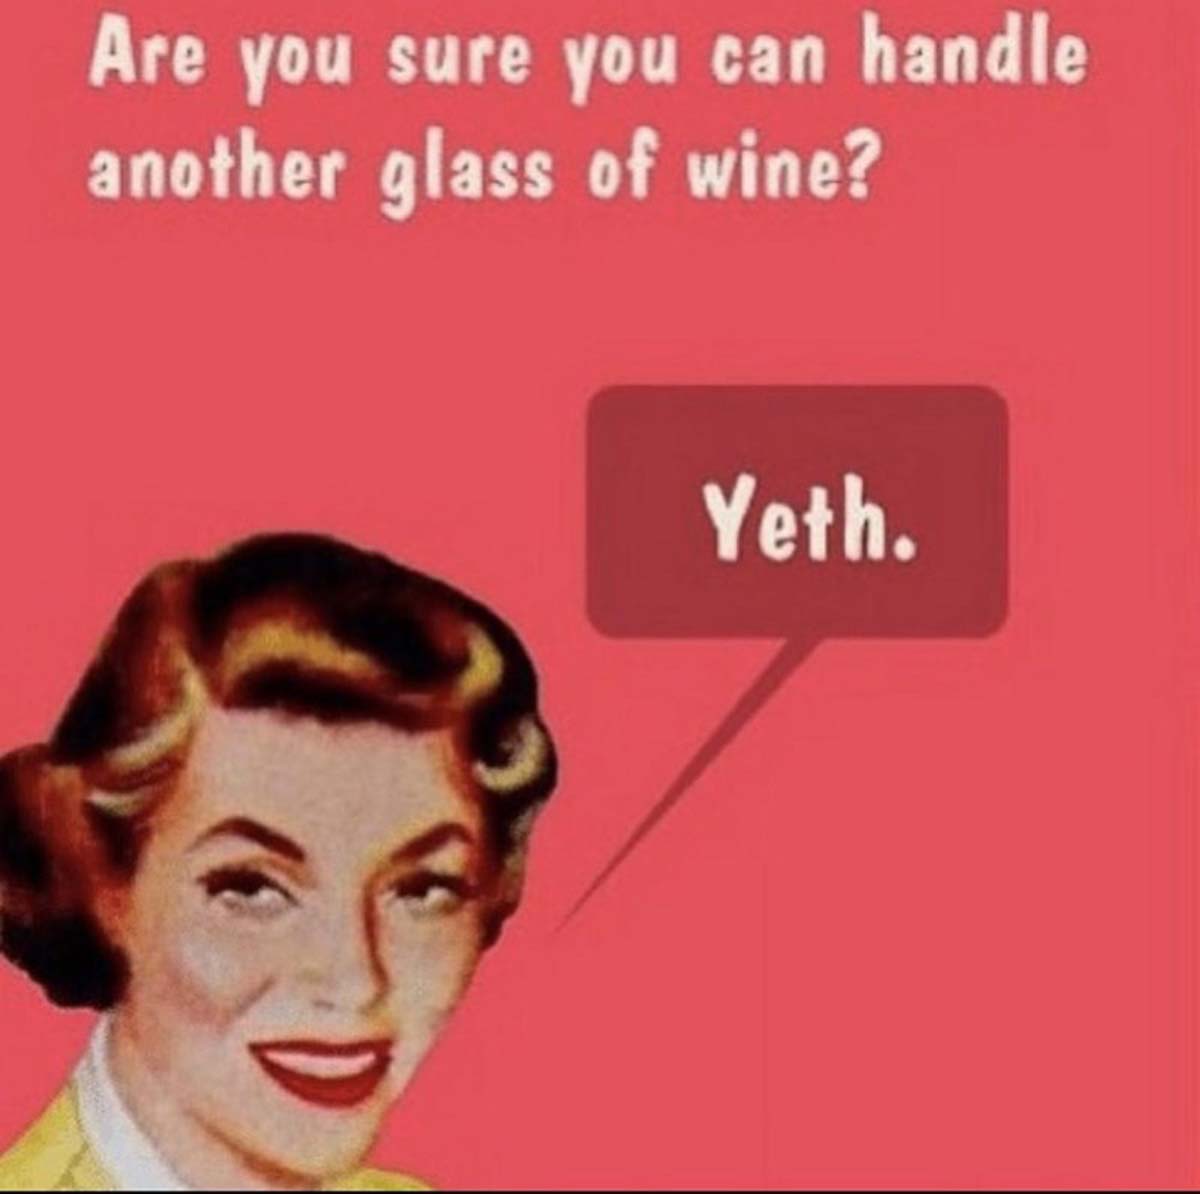 jokes funny wine memes - Are you sure you can handle another glass of wine? Yeth.